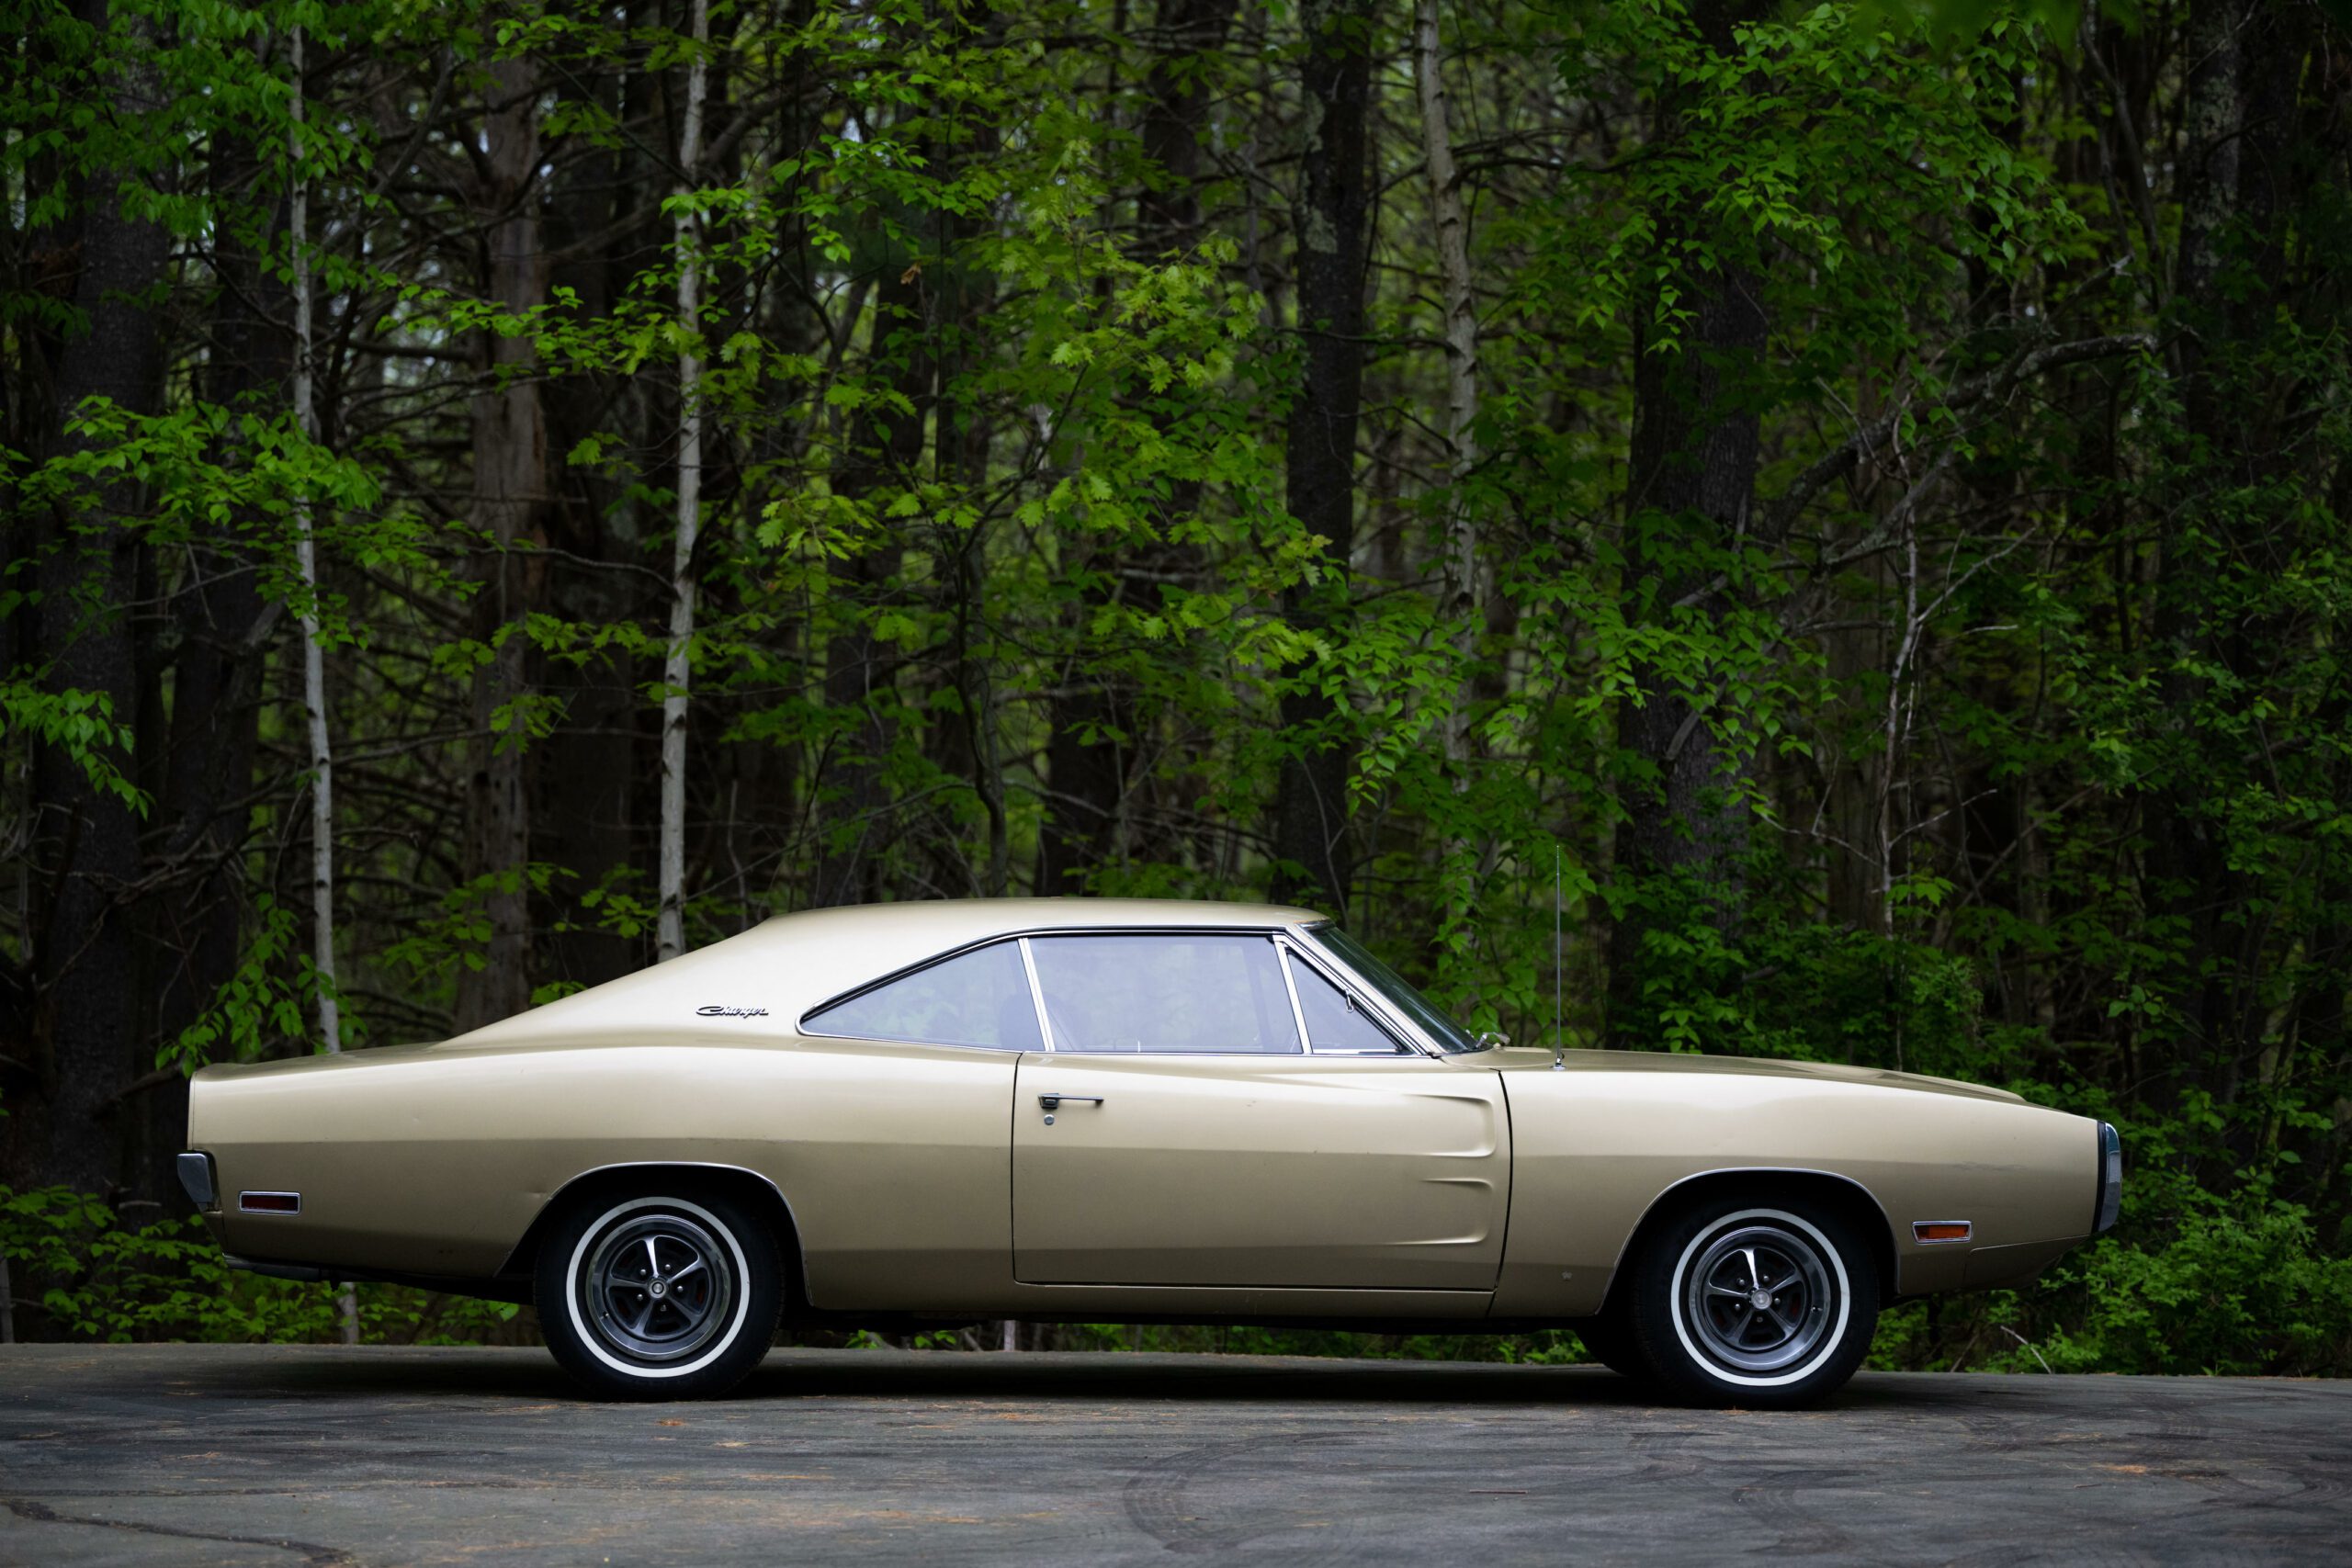 1970 Dodge Charger 500 383 Coupe, dodge, dodge charger